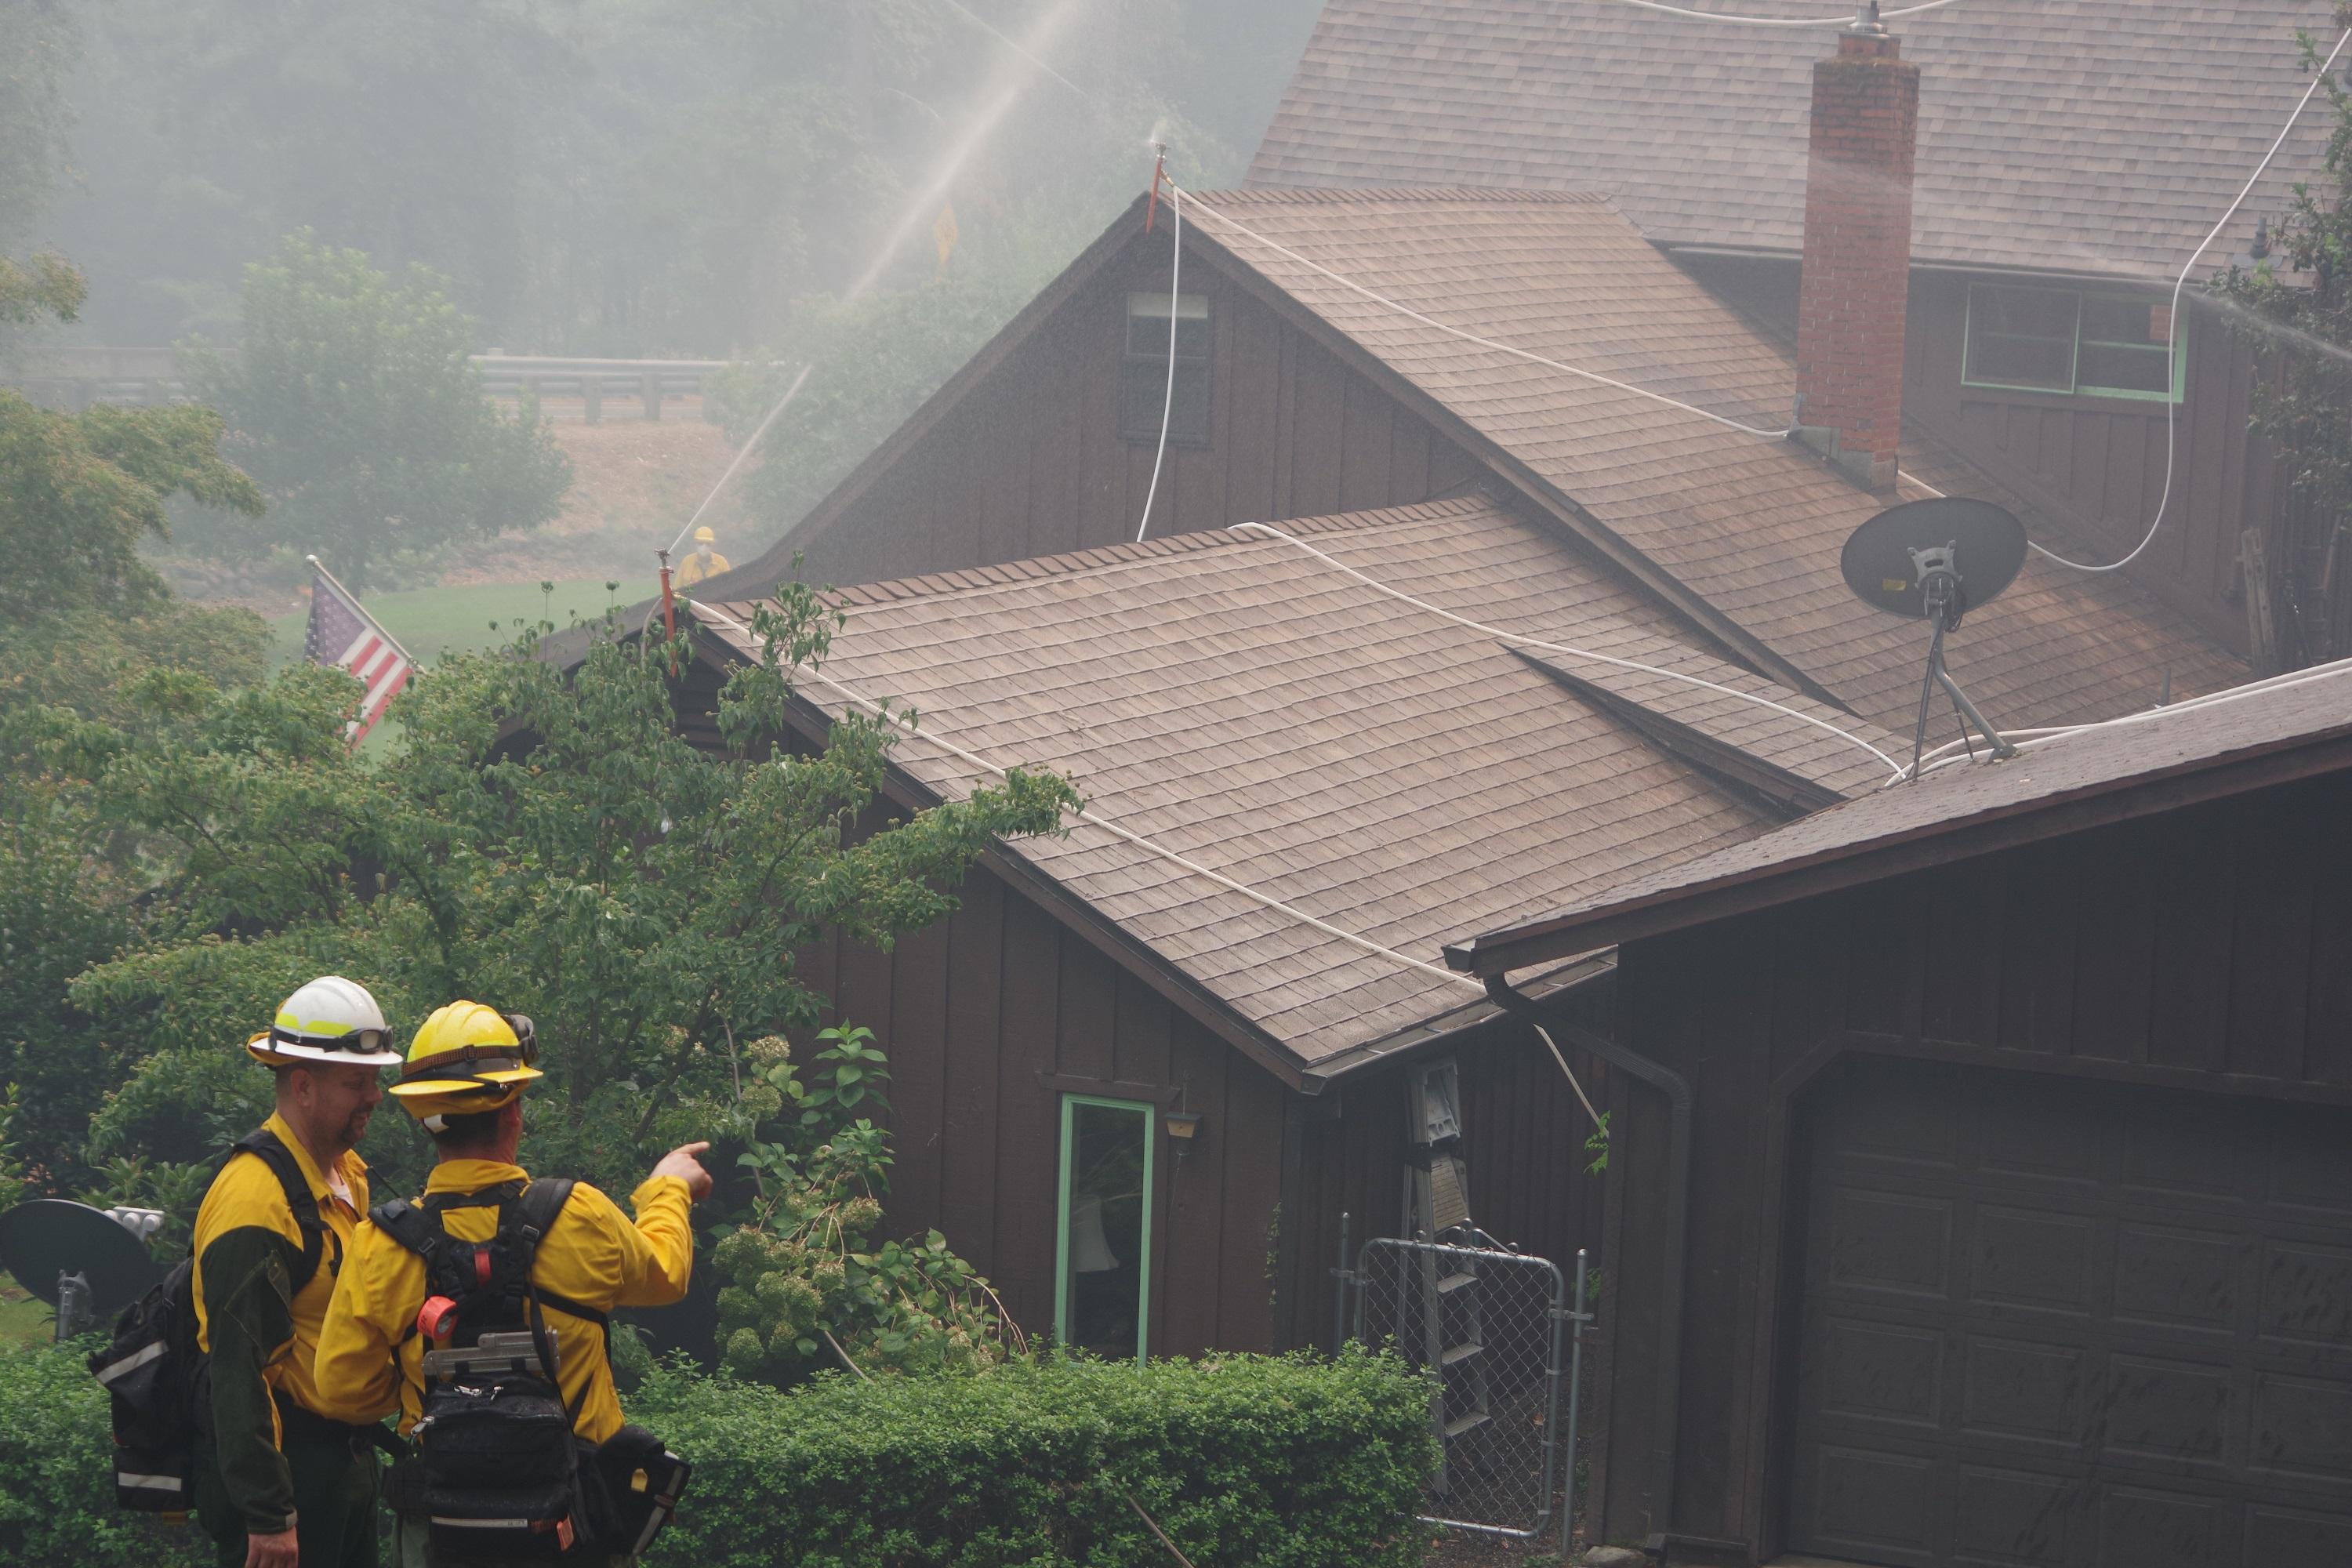 A series of sprinklers are spraying water on the roof and sides of a large house. Two firefighters in the foreground are looking to see if the sprinklers are working well.